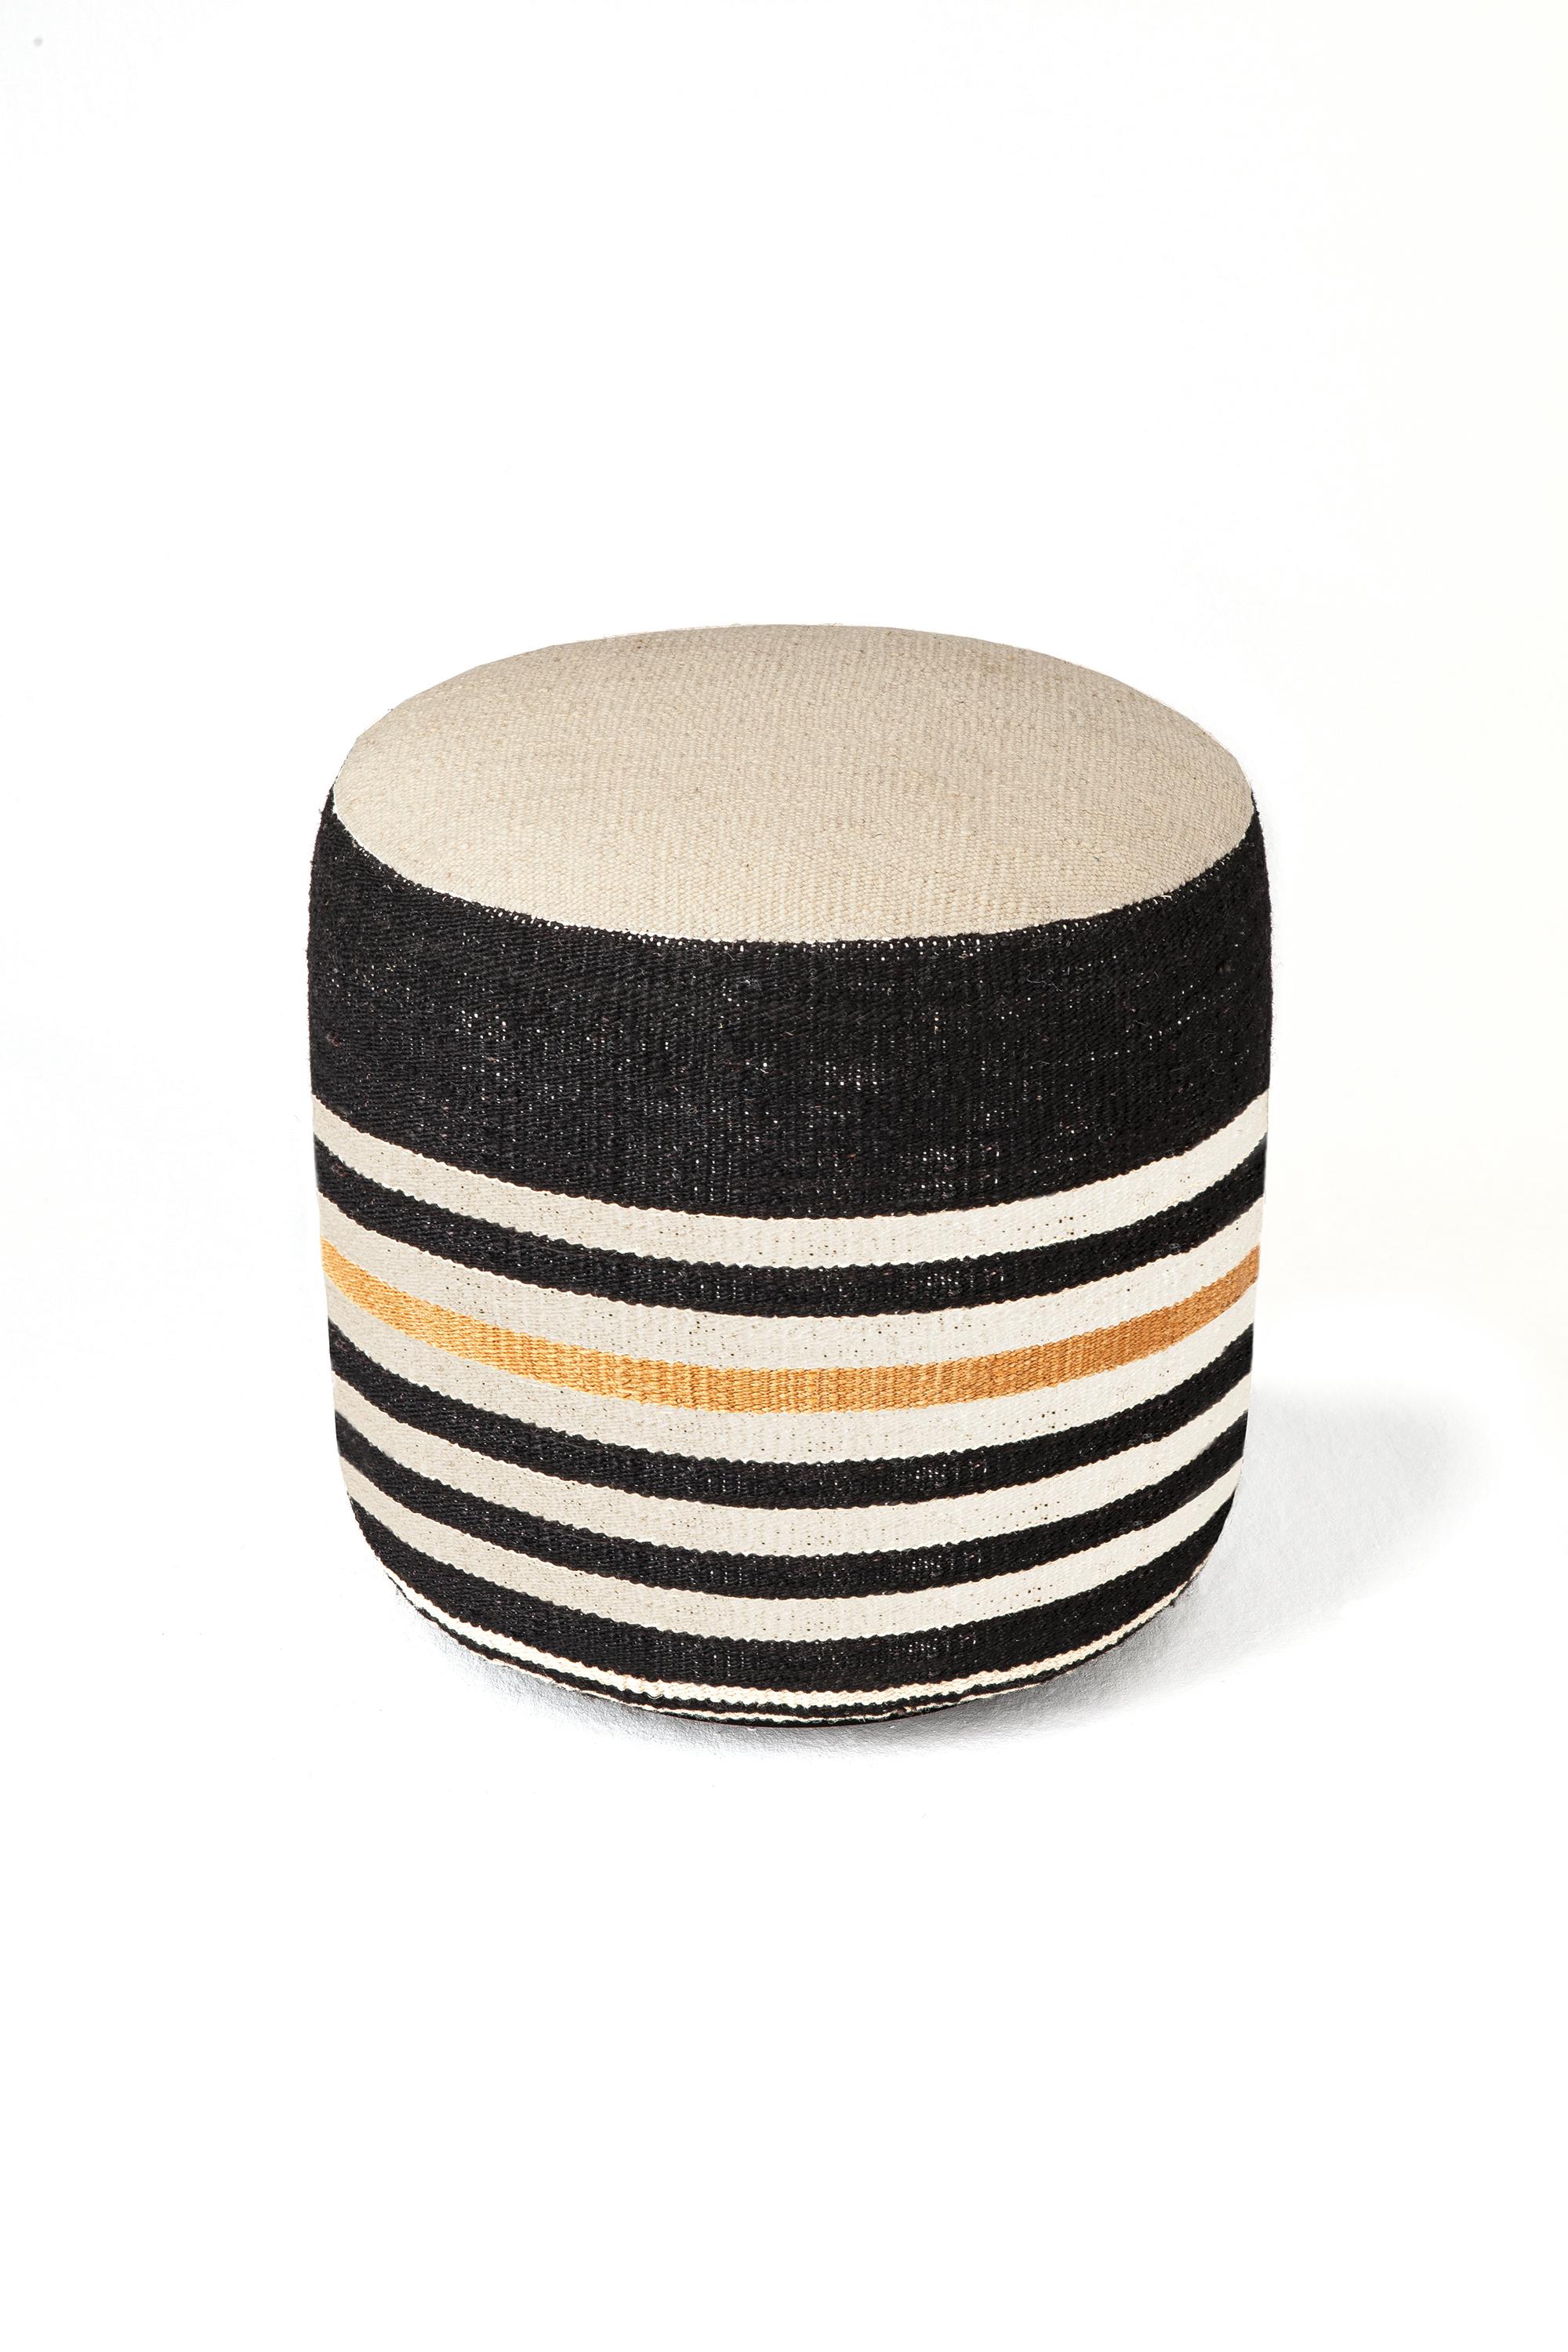 'Kilim 3' Pouf by Nani Marquina and Marcos Catalán for Nanimarquina For Sale 6